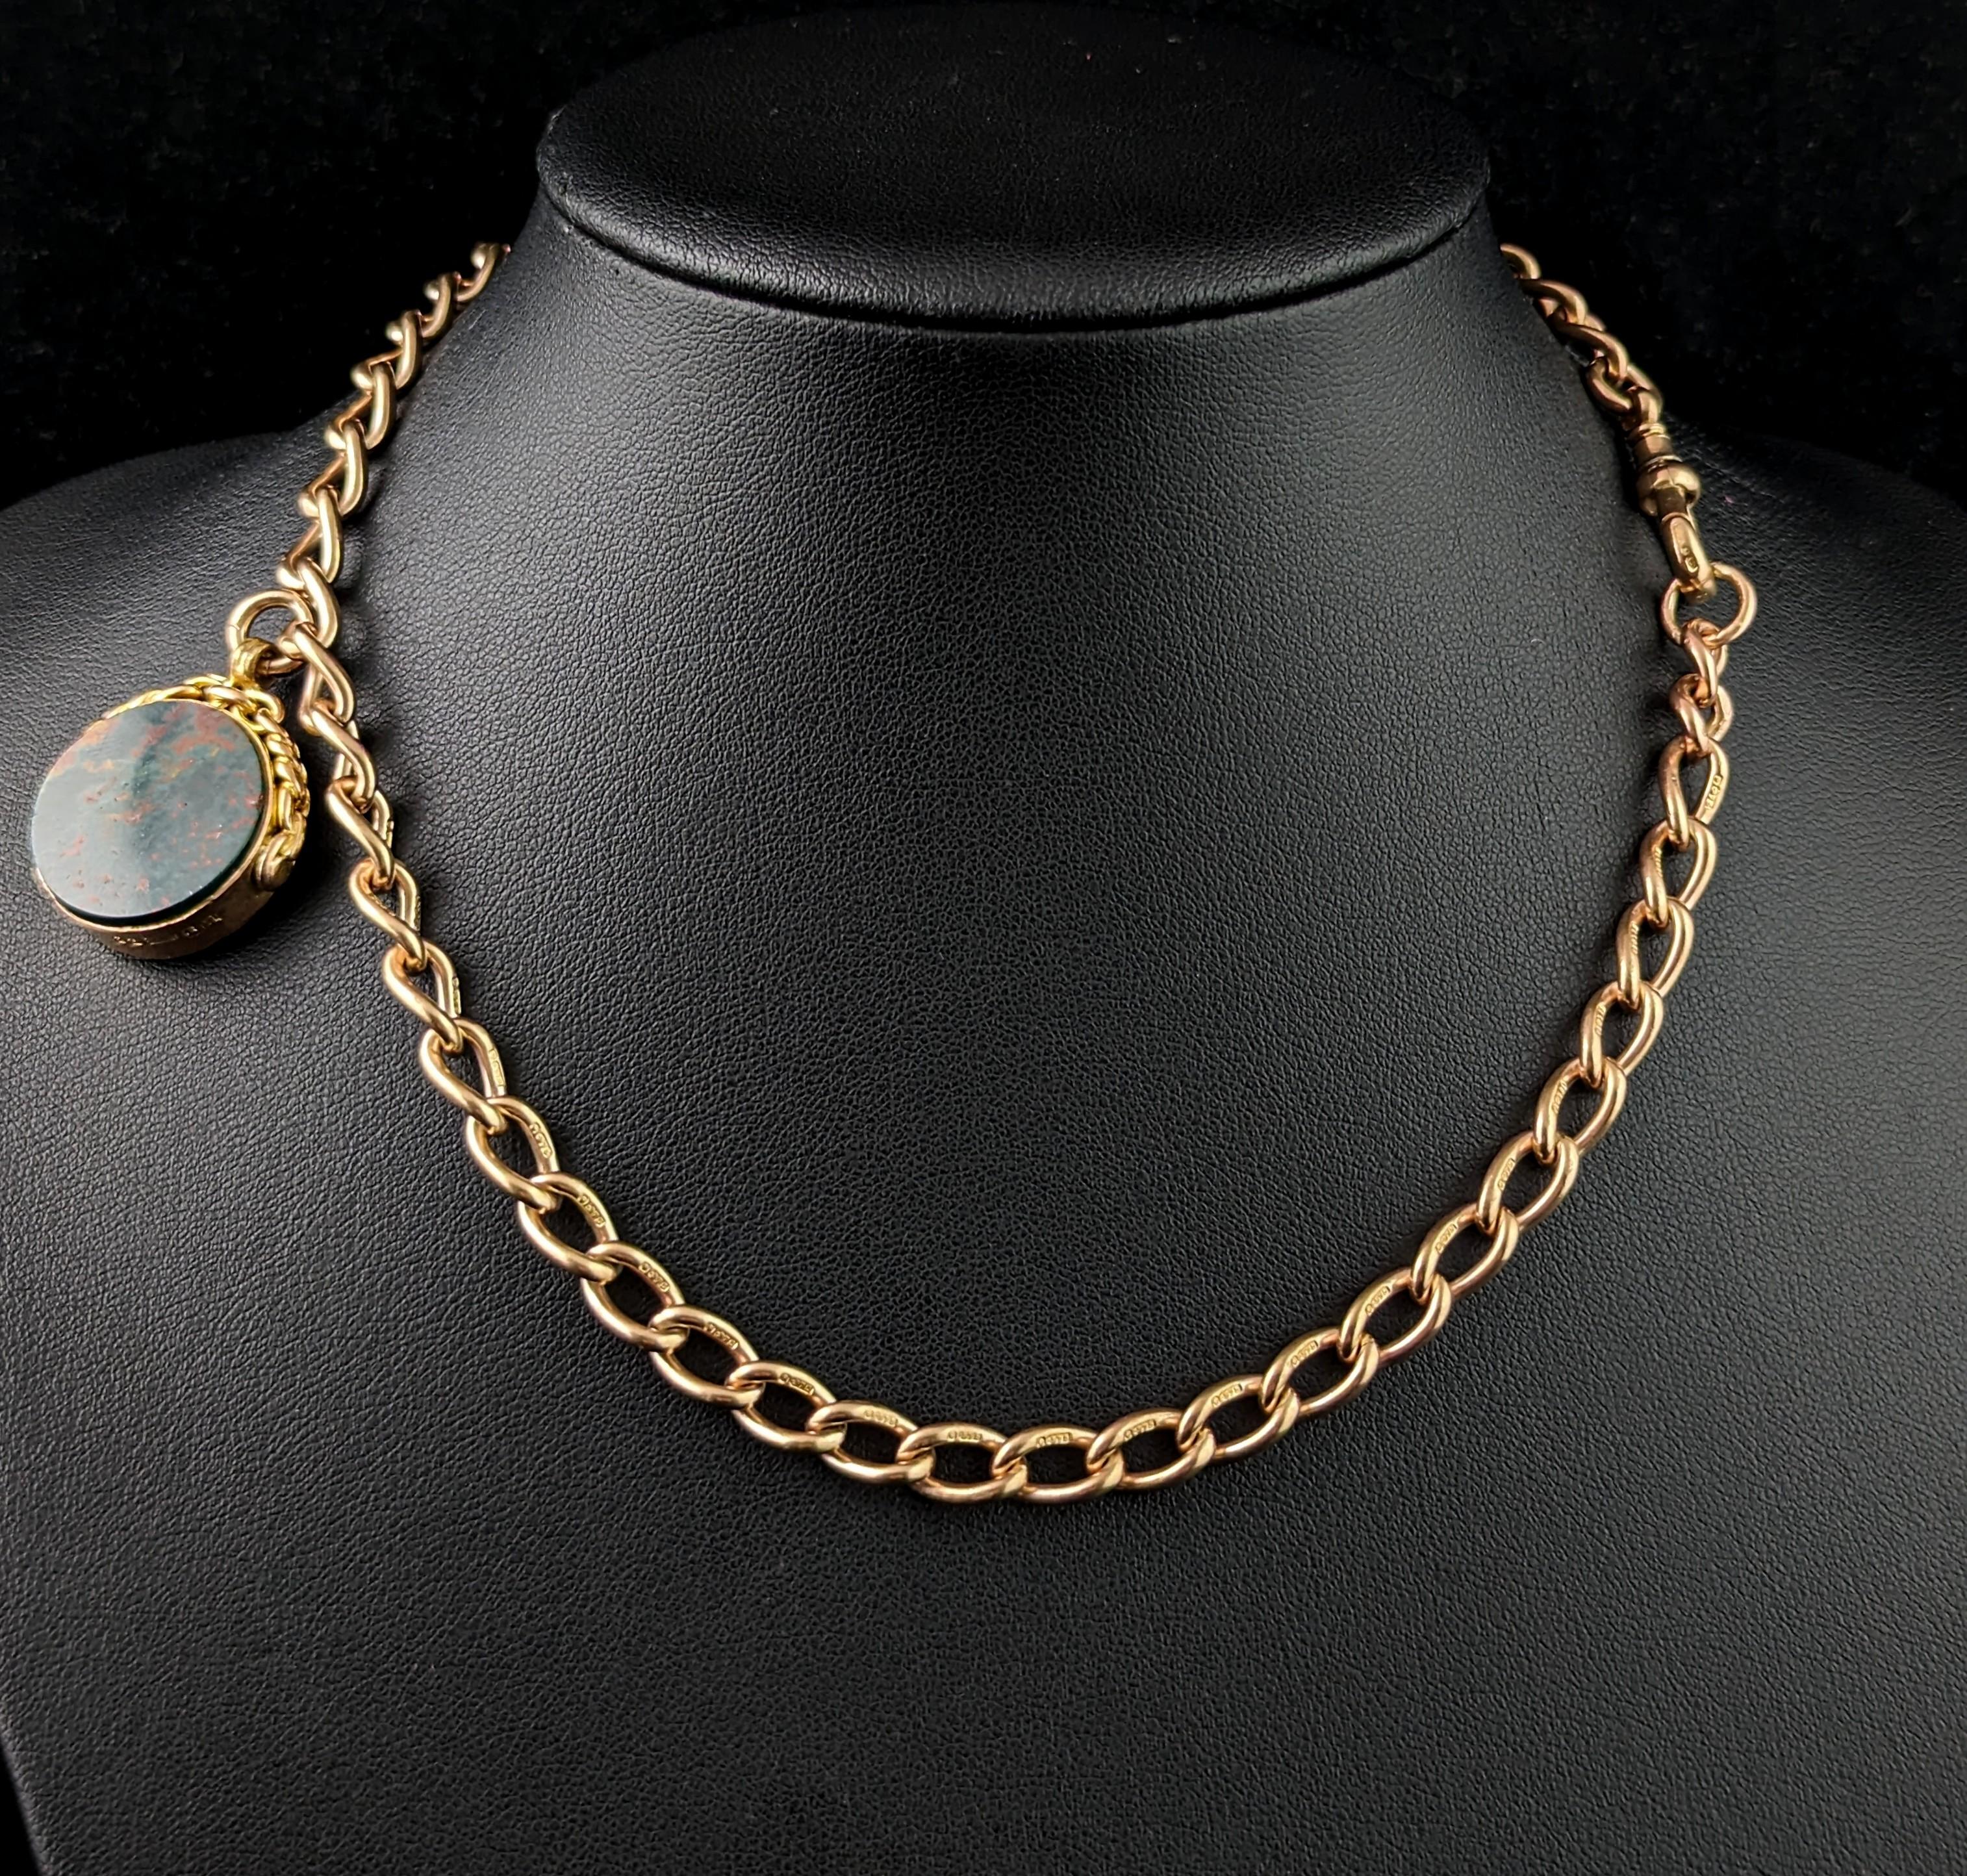 You are sure to be charmed by this handsome vintage Art Deco era 9ct gold Albert chain.

It is an open curb link chain in rich 9ct gold with both rosey and yellow gold tones but a mostly yellow gold hue, each link individually stamped for 9ct gold,